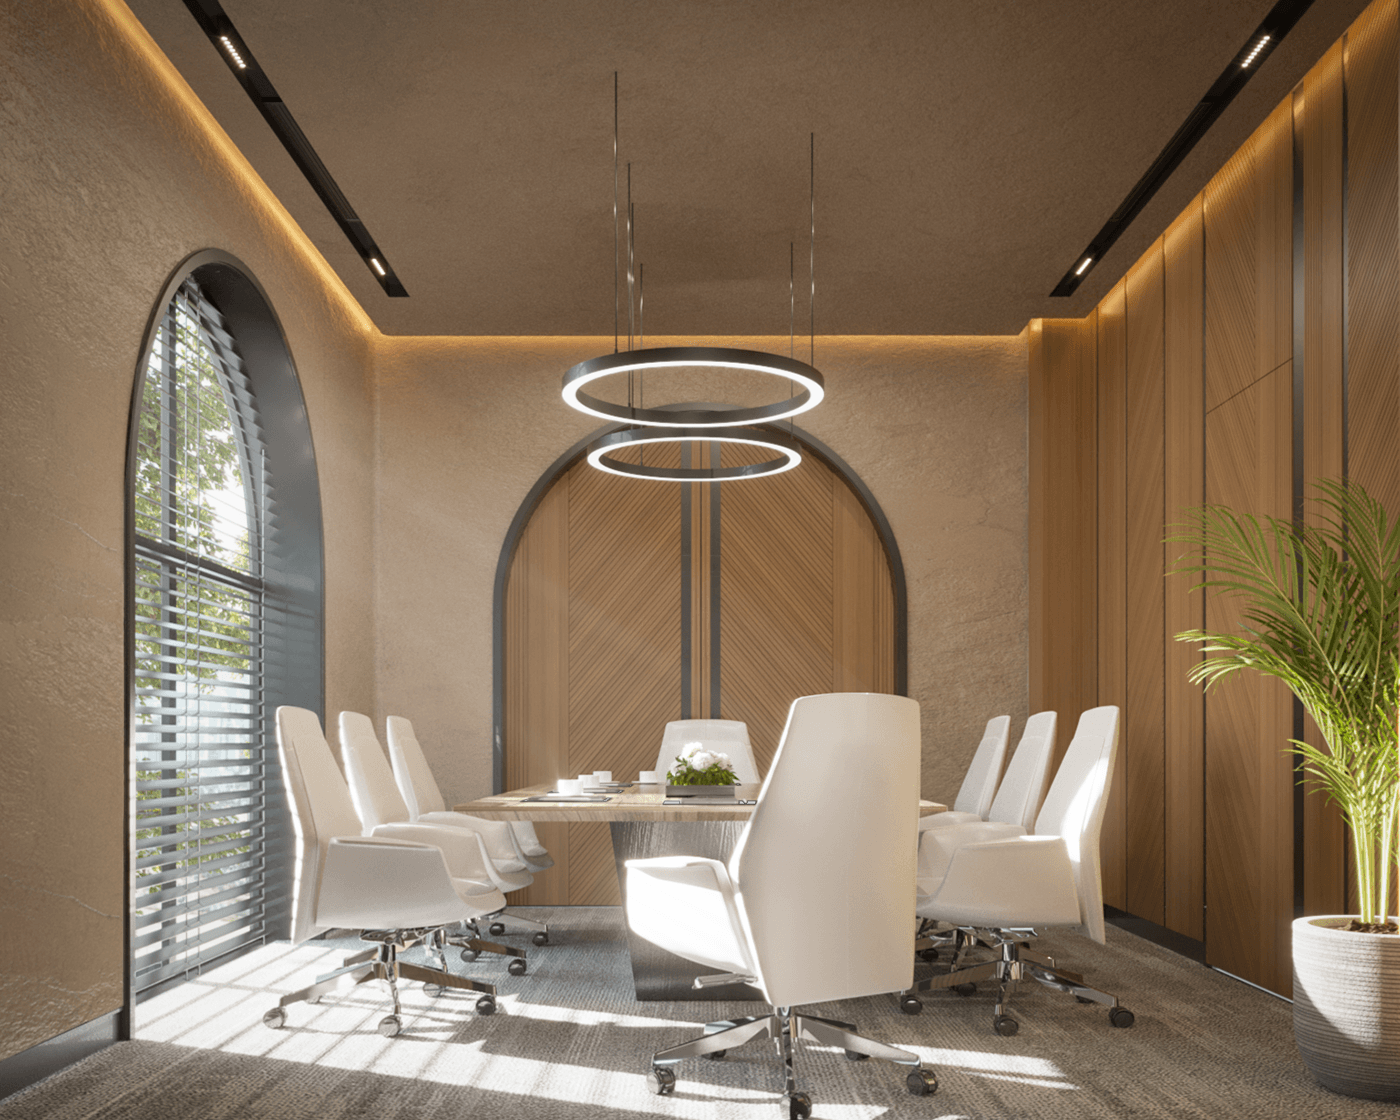 Office Office Design Office interior office furniture Office Building interior design  Interior architecture workspace visualization